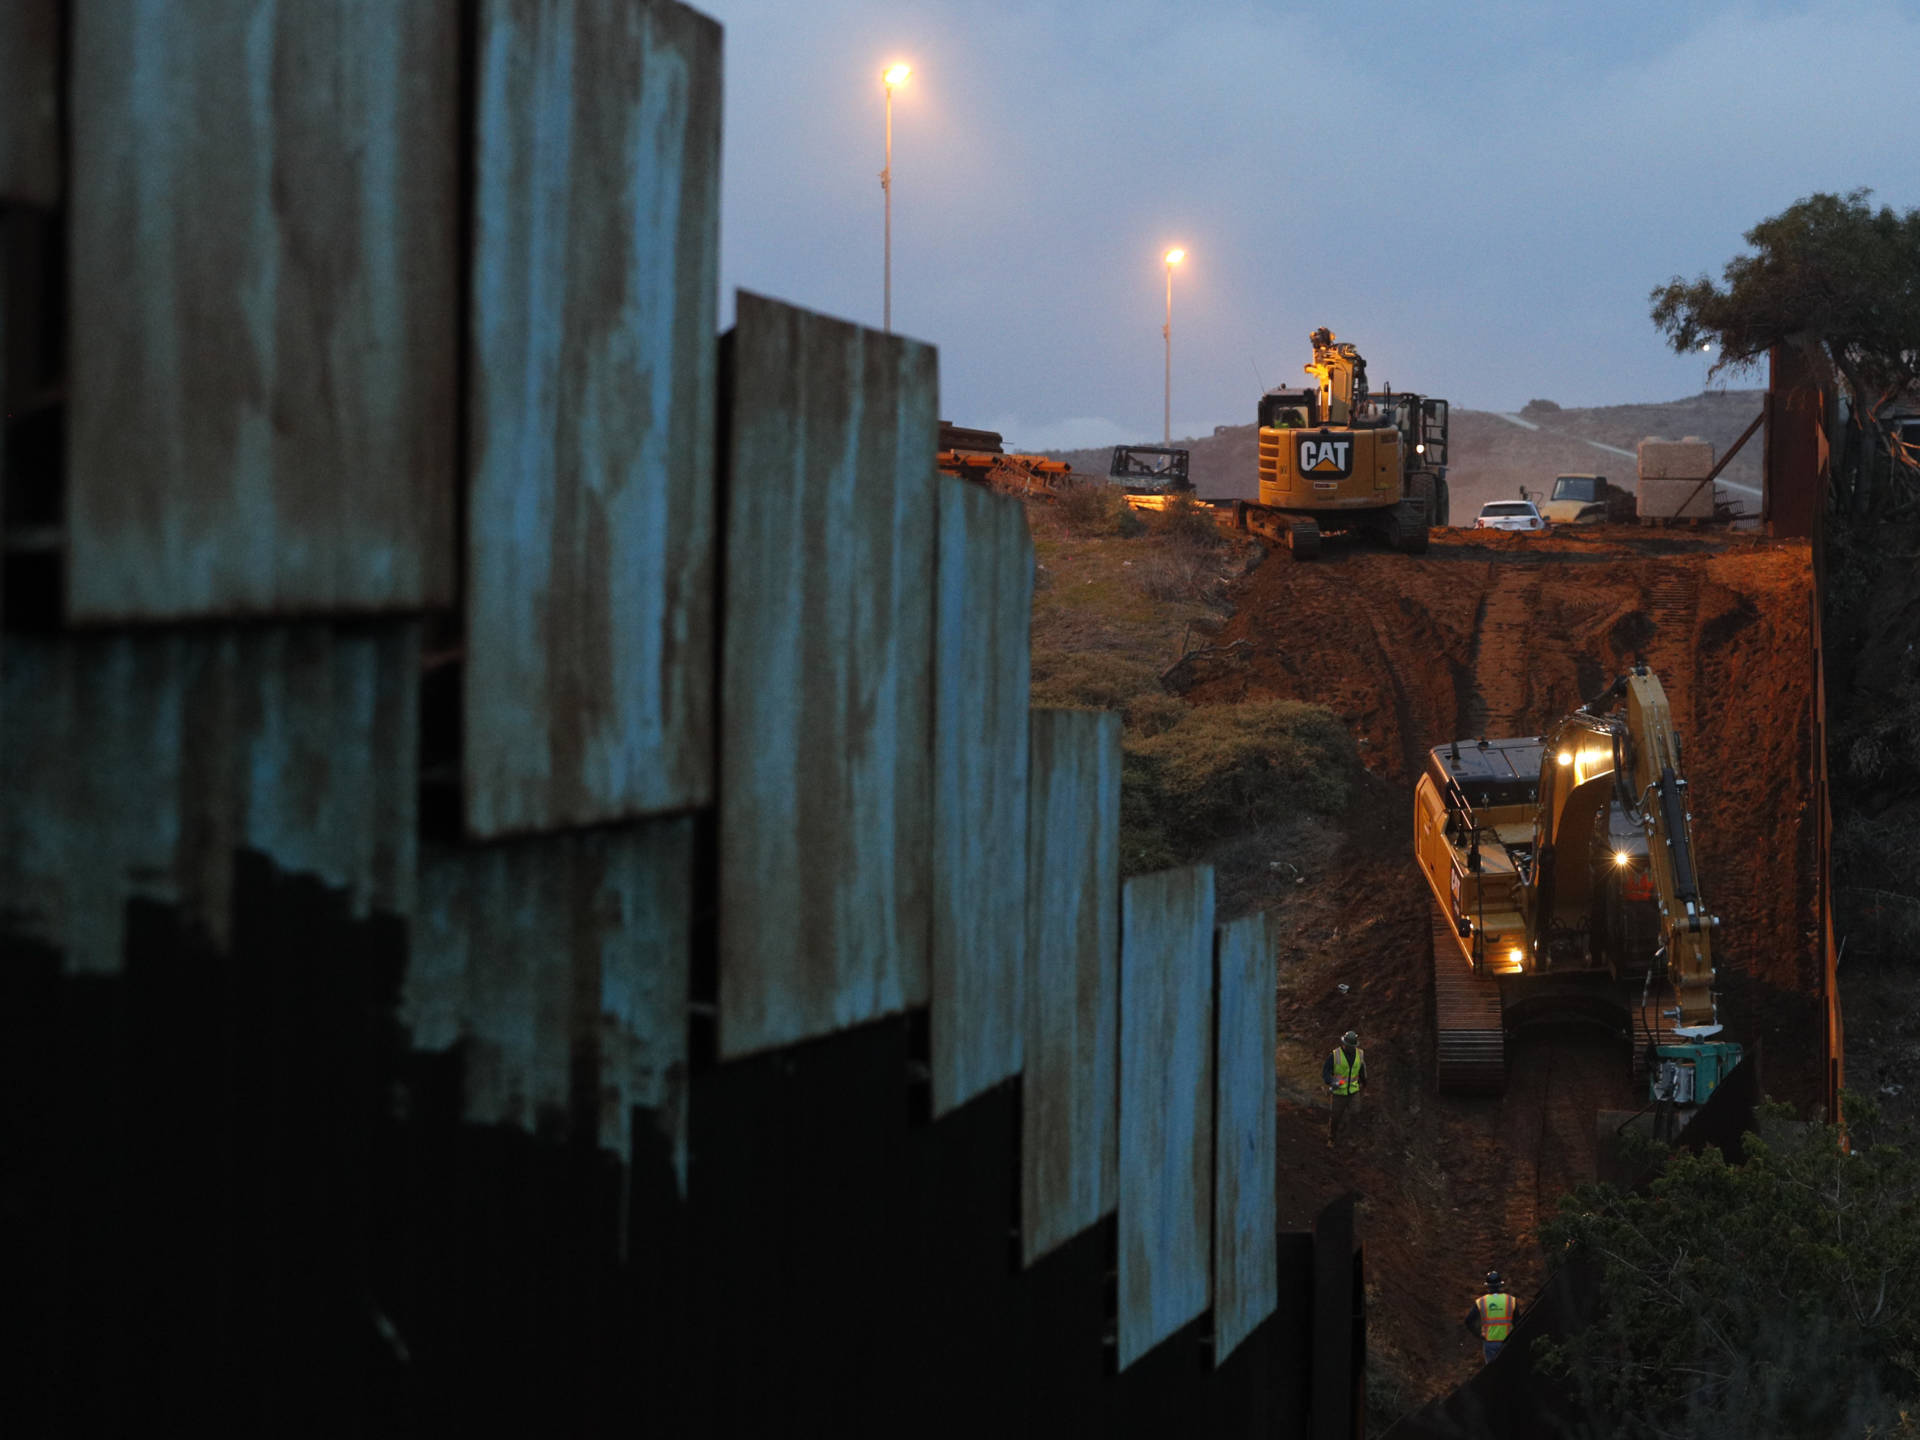 Contractors work to reinforce a section of the U.S. border wall in San Diego where scores of Central American migrants have crossed illegally in recent weeks, photographed through the fence from Tijuana, Mexico. Rebecca Blackwell/AP